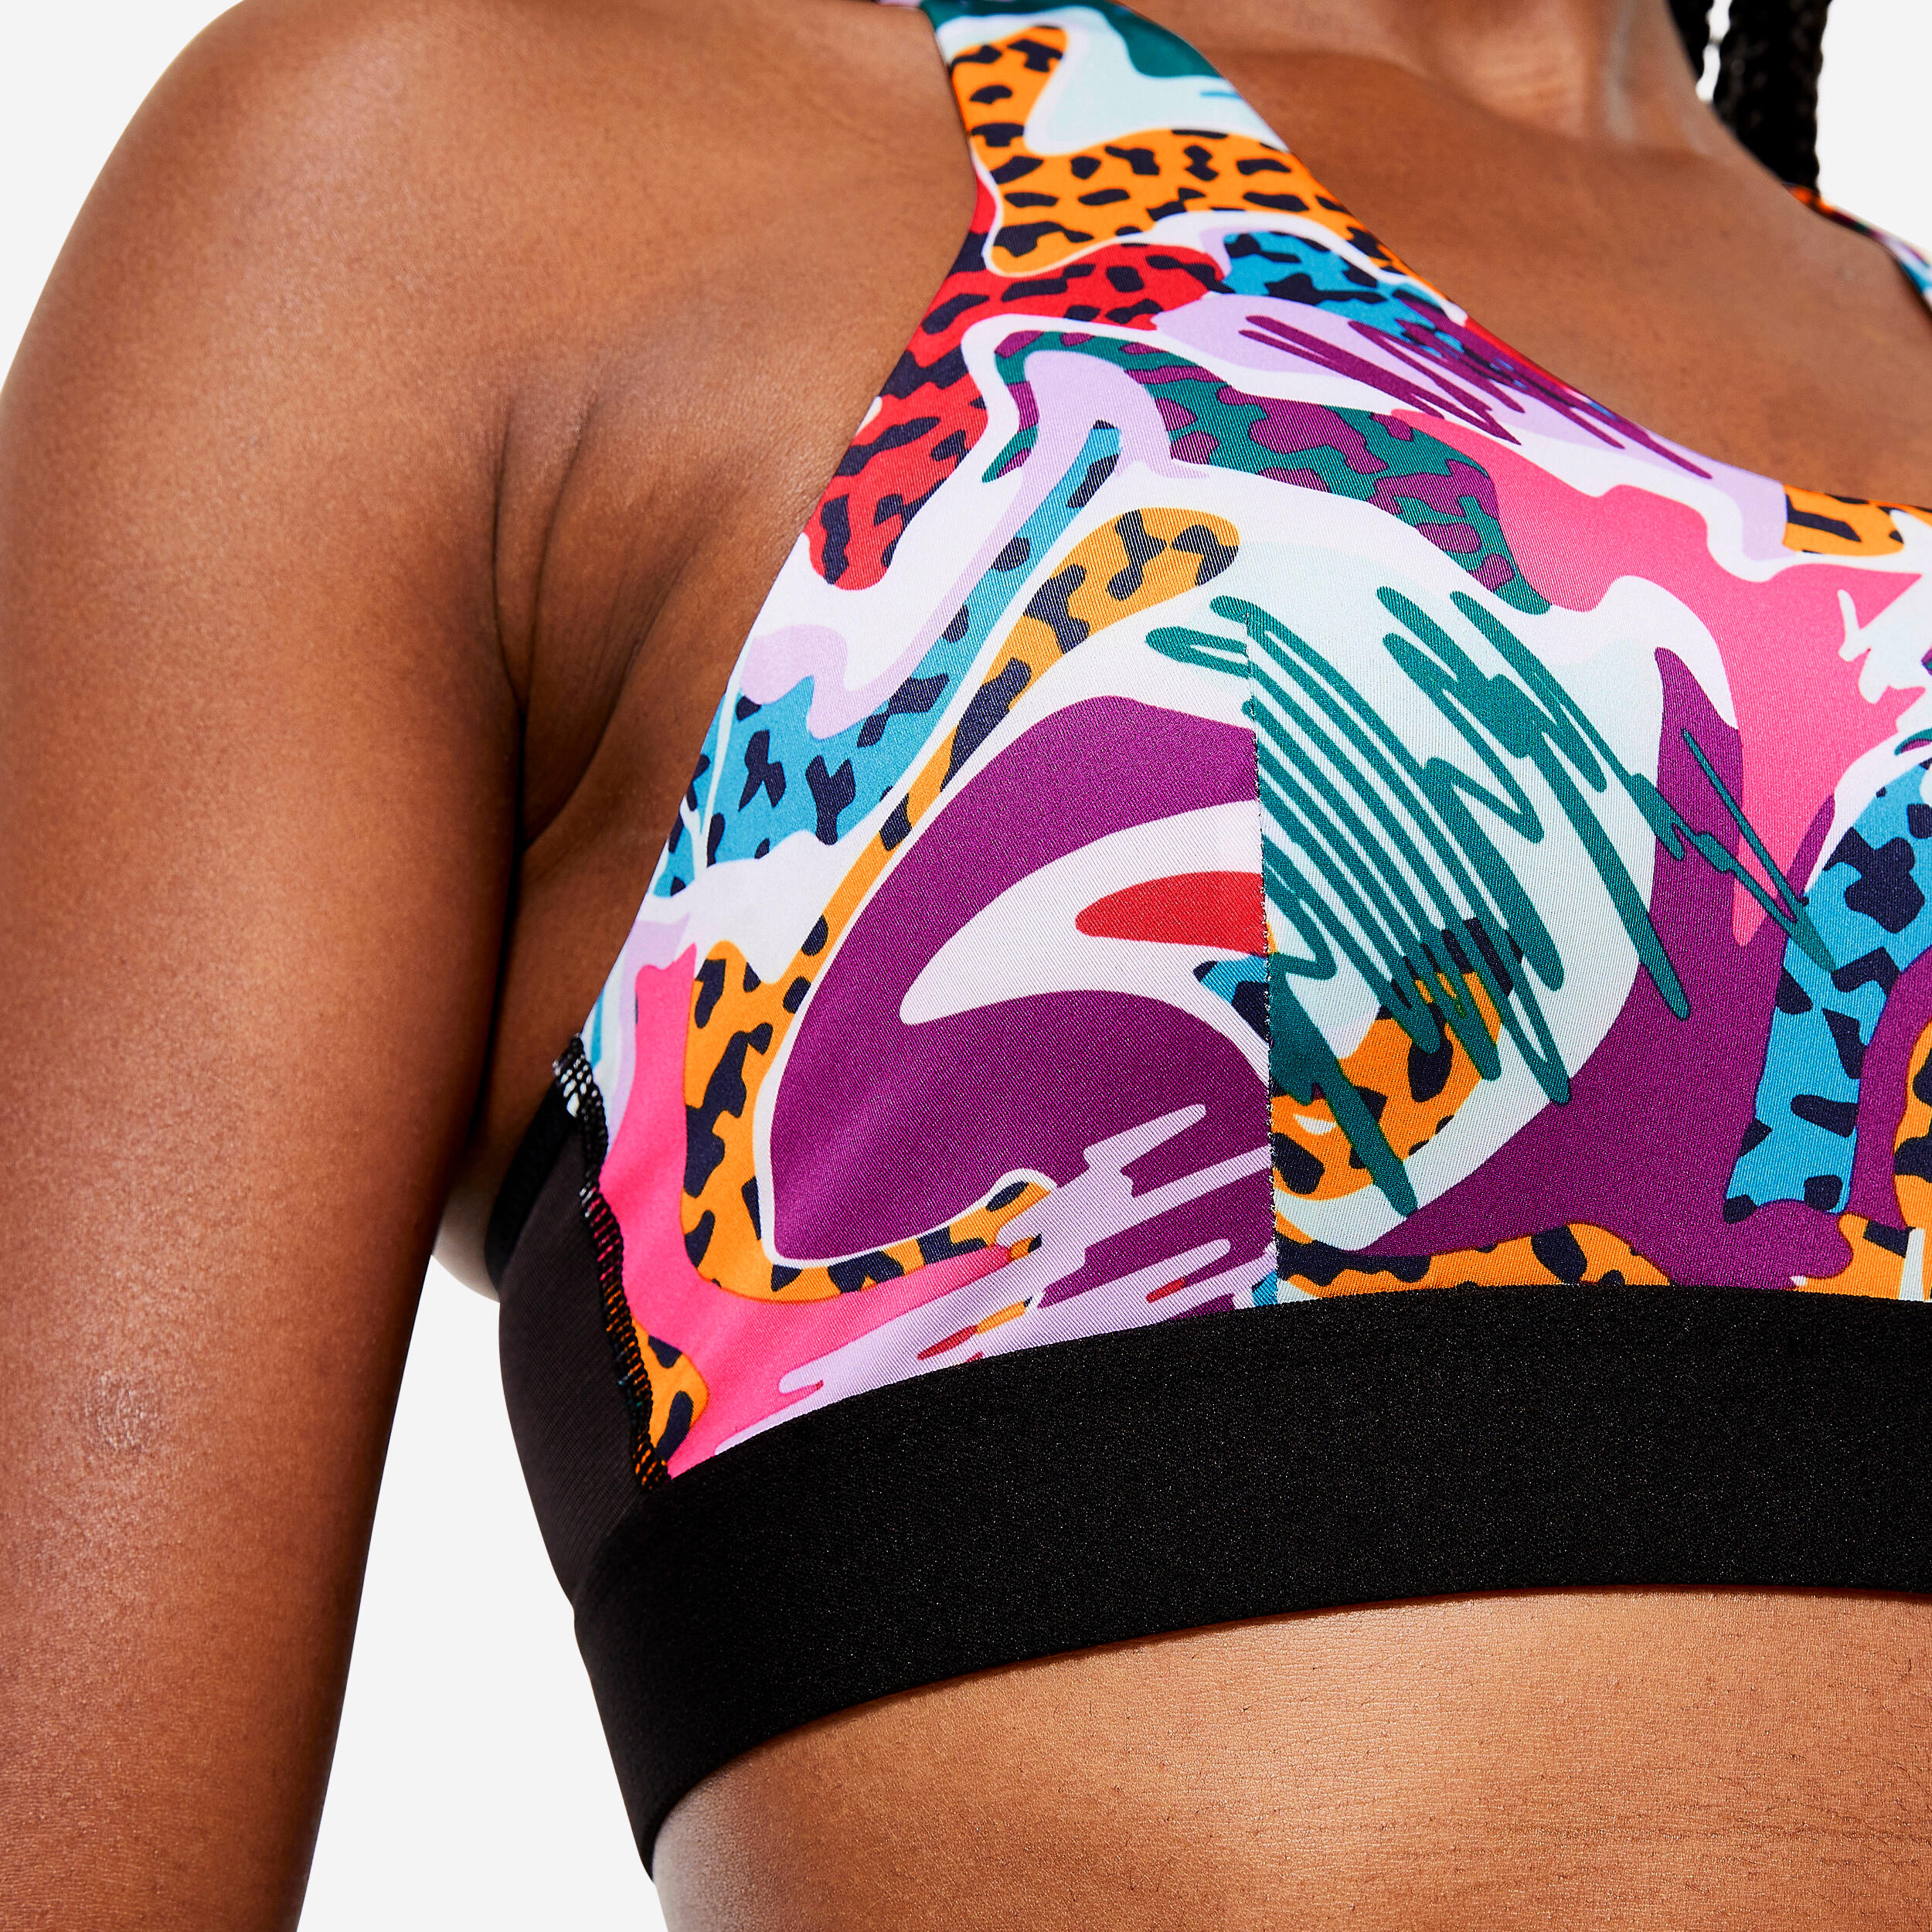 Women's Medium Support Racer Back Sports Bra with Cups - Multicoloured Prints 6/6